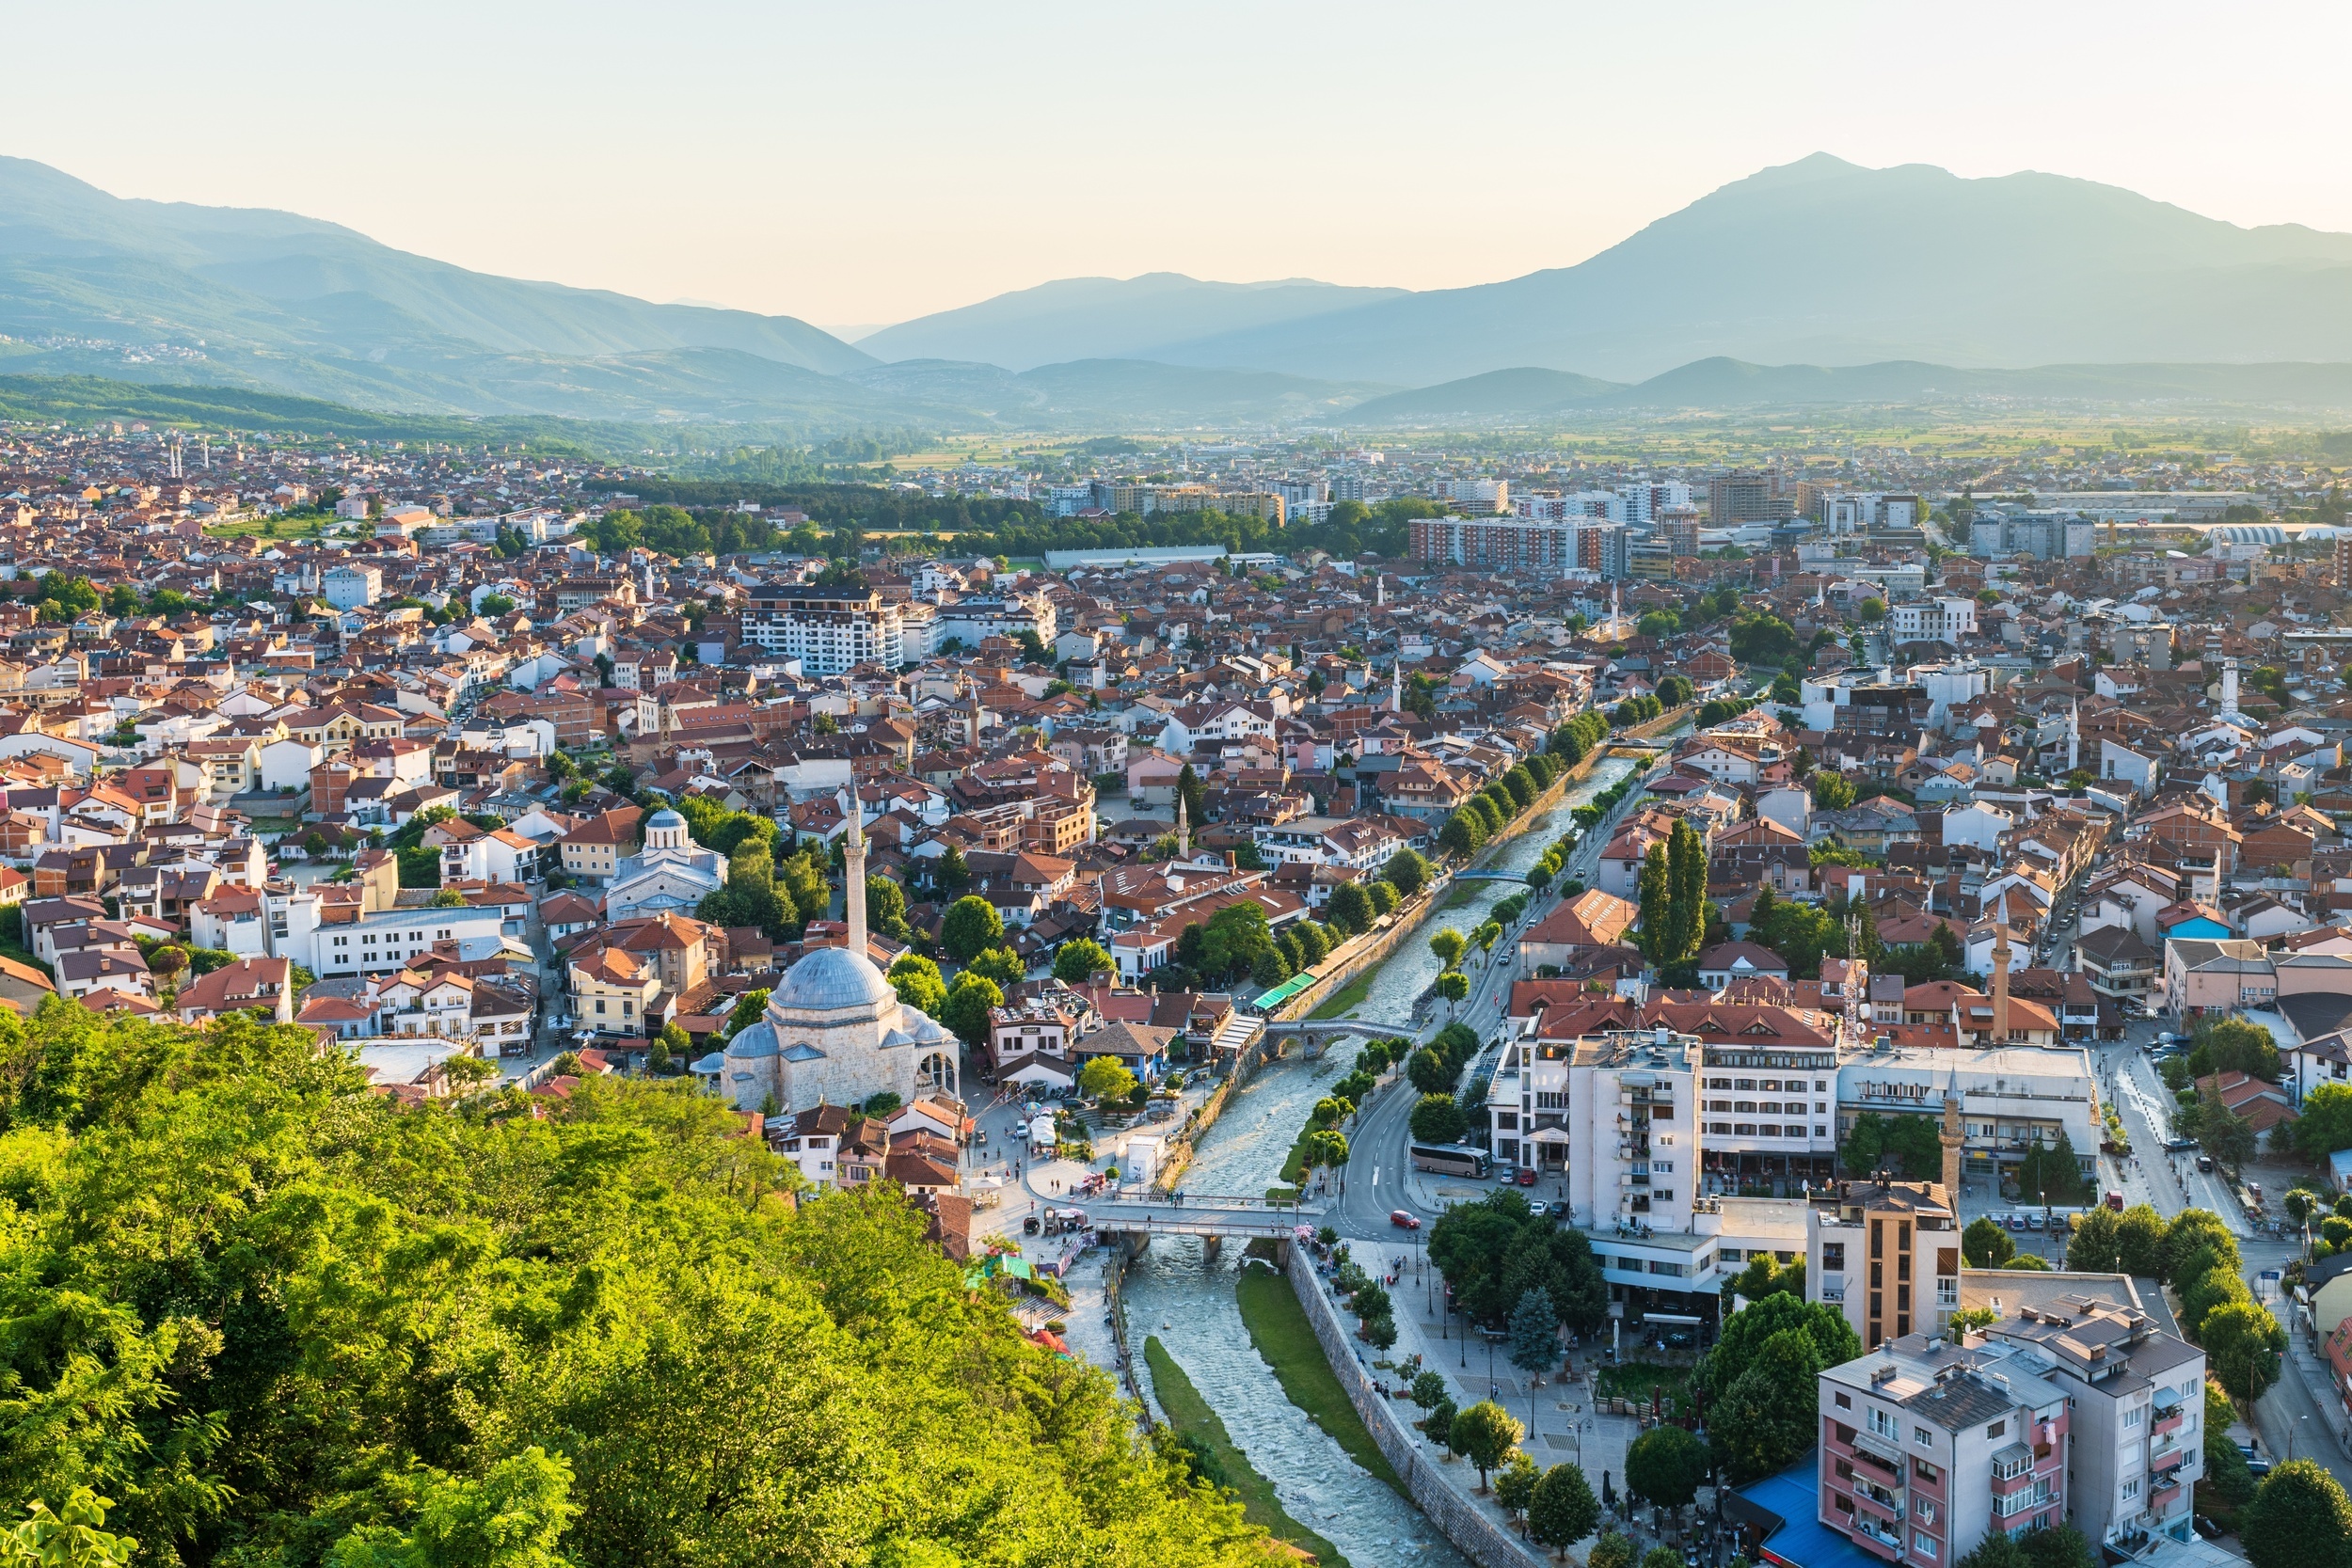 <p>Kosovo’s cultural capital isn’t on many traveler’s itineraries. But it should be! The best time to visit is spring before it gets too hot to hike up to the fortress or enjoy a tasty Kosovo coffee along the river.</p><p><a href='https://www.msn.com/en-us/community/channel/vid-cj9pqbr0vn9in2b6ddcd8sfgpfq6x6utp44fssrv6mc2gtybw0us'>Follow us on MSN to see more of our exclusive lifestyle content.</a></p>